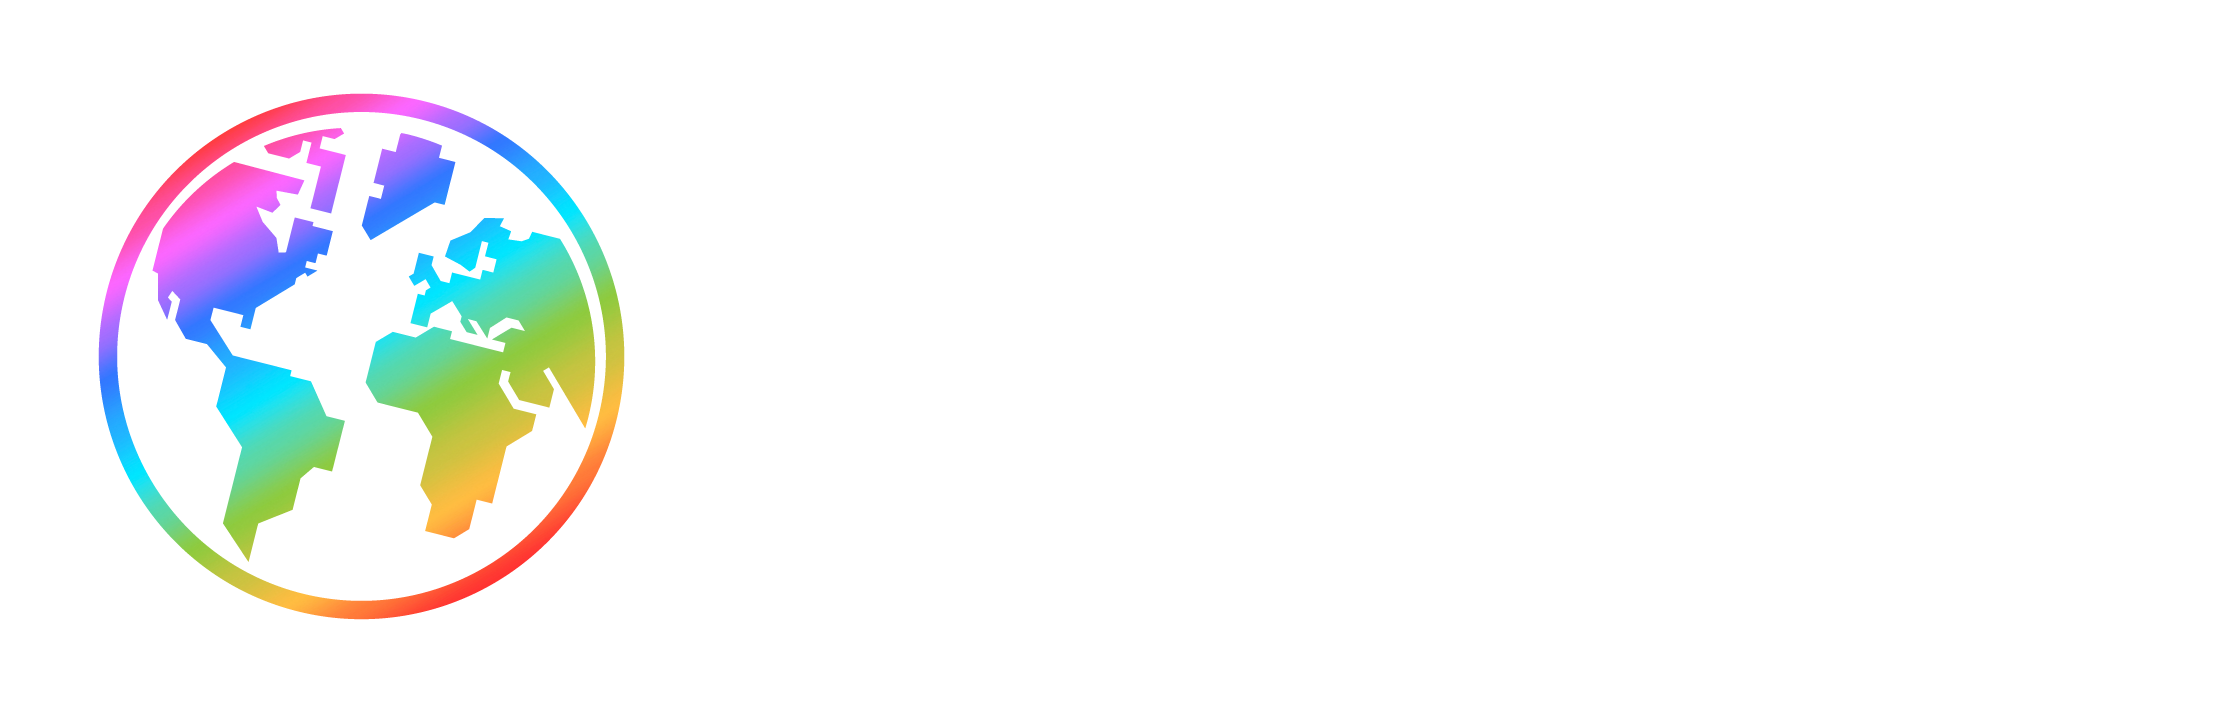 Sexuality & Social Work